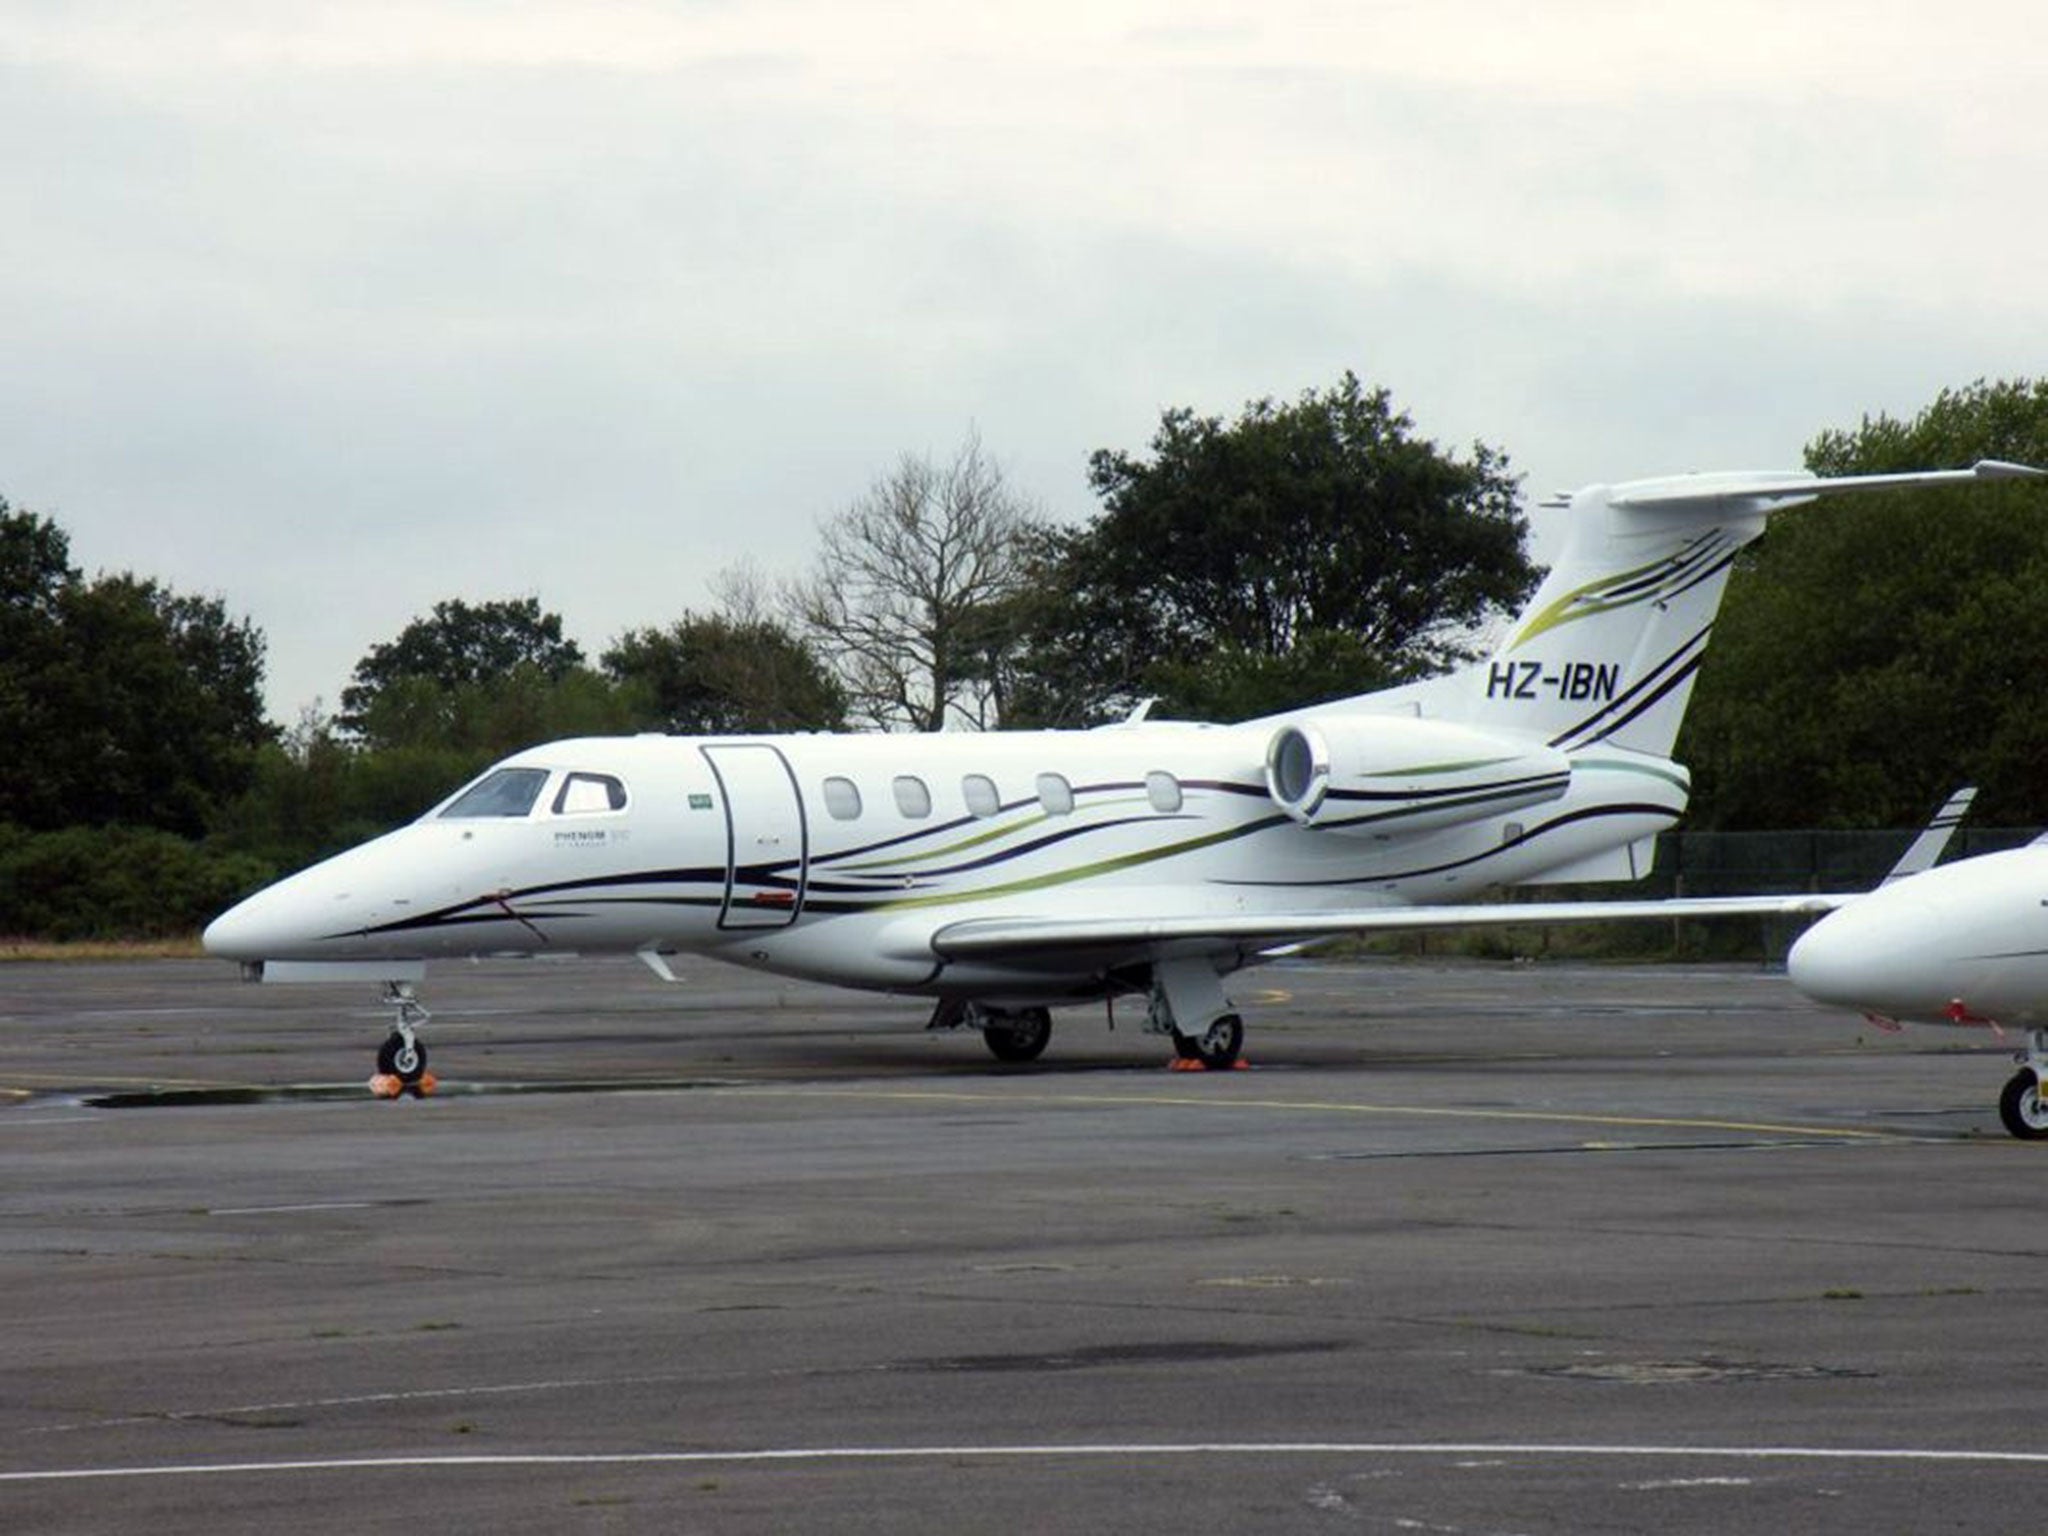 The Phenom 300 jet believed to be the aircraft that crash-landed at Blackbushe Airport (Image: Robert Belcher/PA)